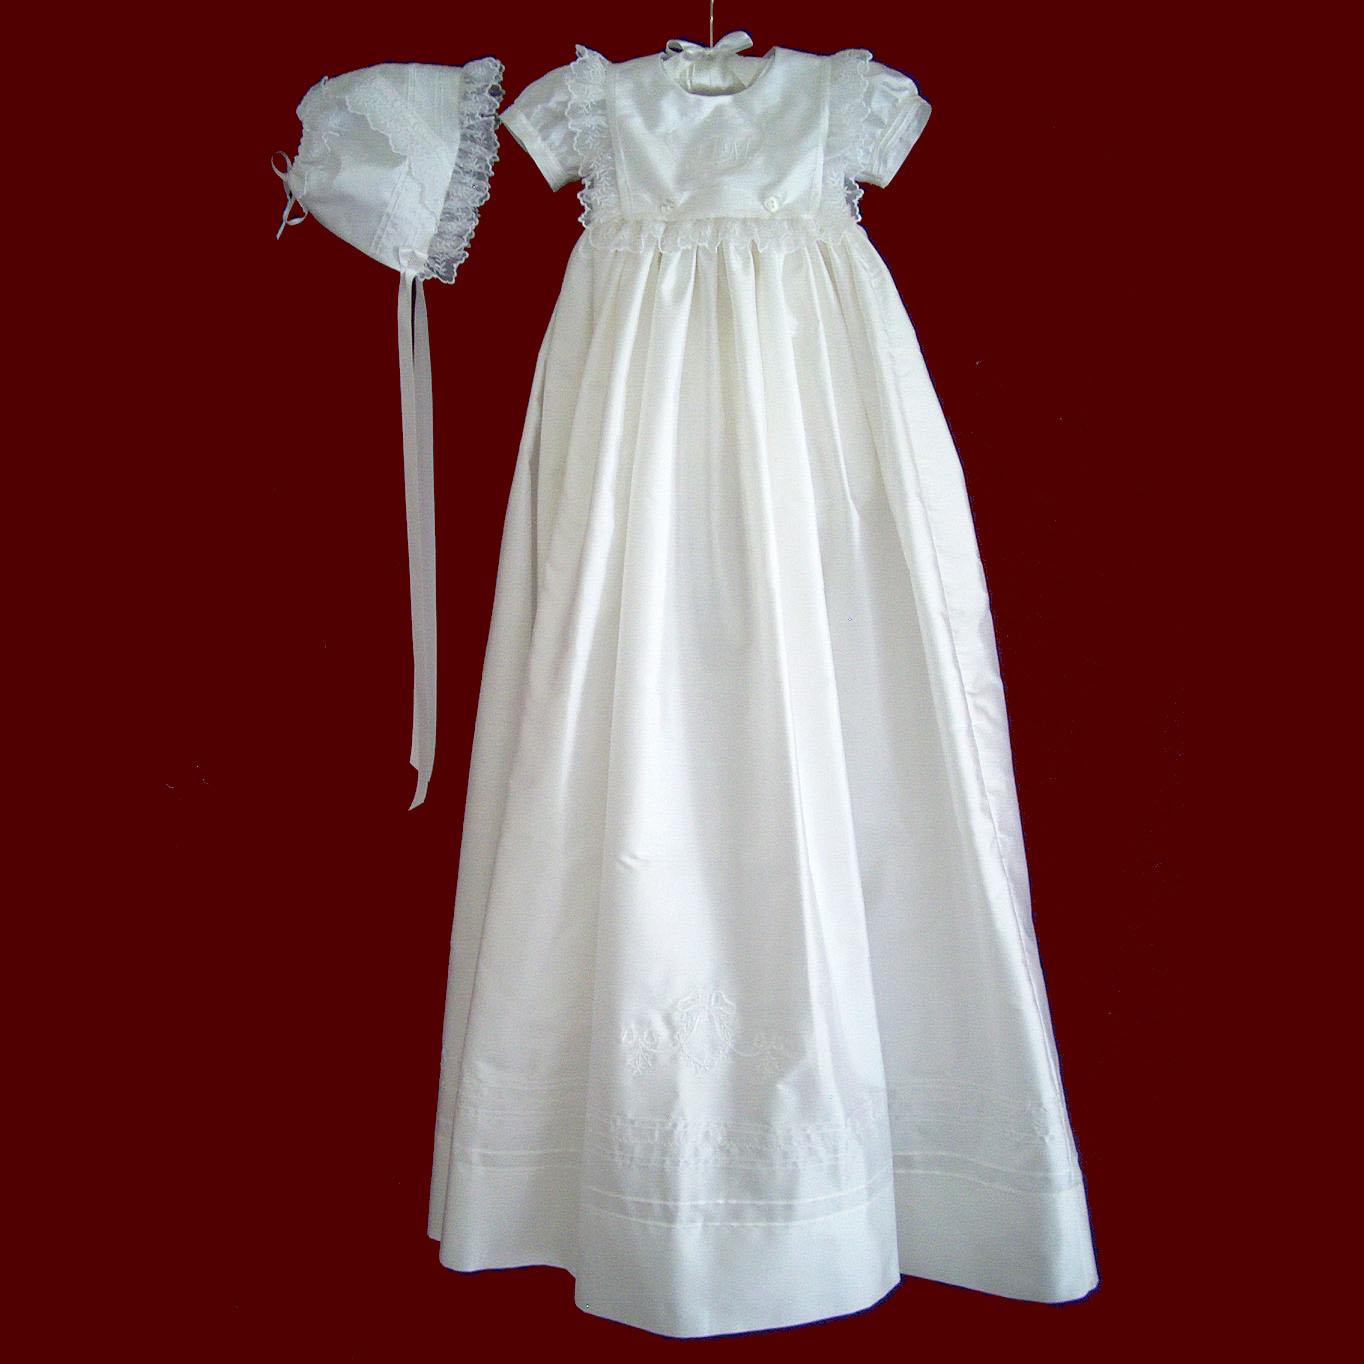 Silk Girls Dress with Panties and Detachable Gown, Monogrammed Bib and Bonnet